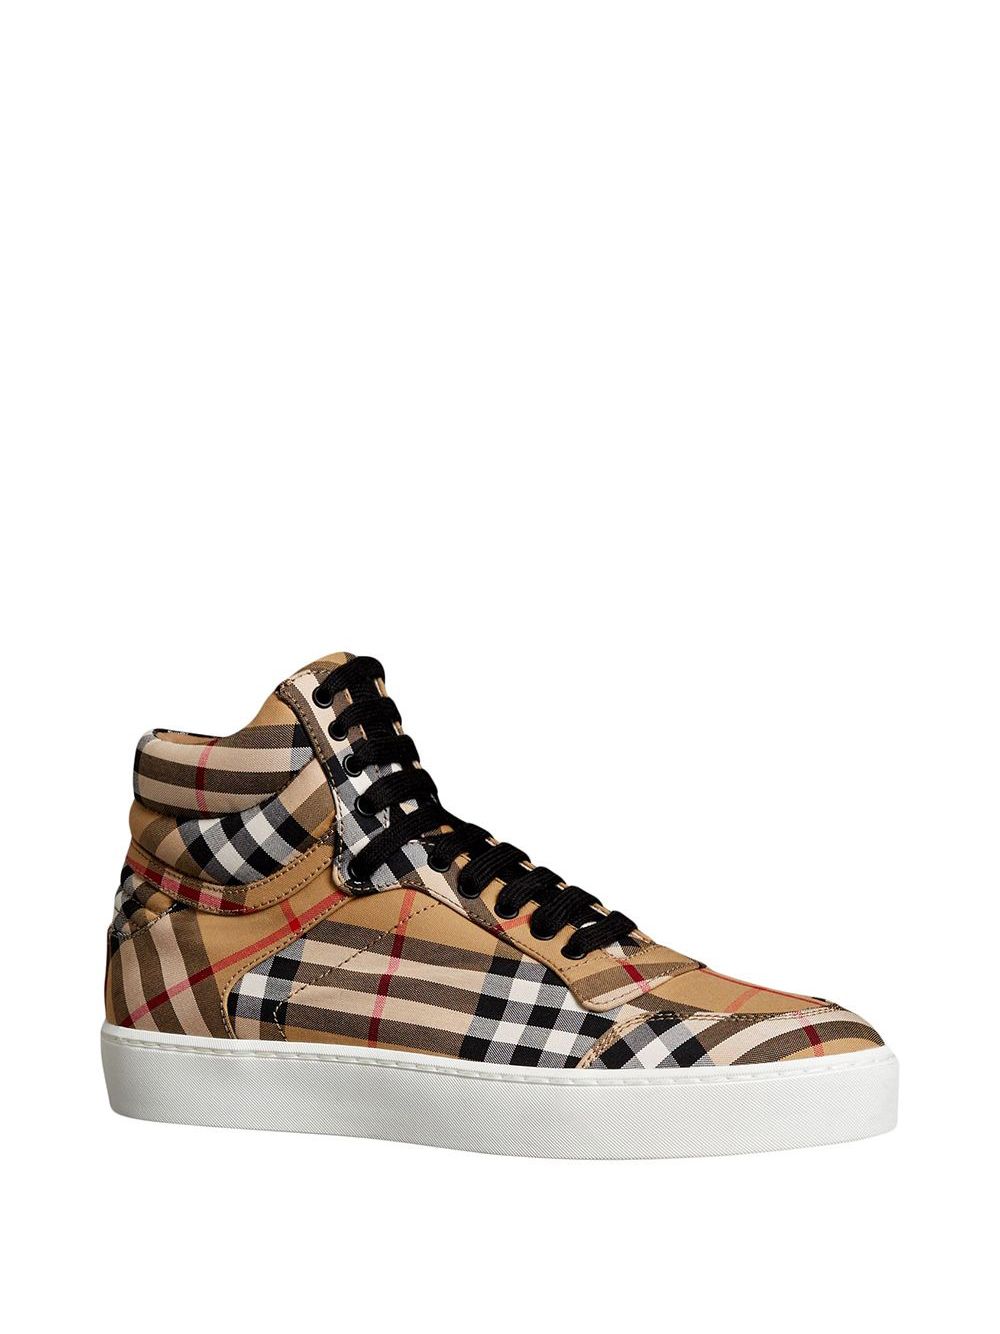 Burberry Vintage Check Cotton High-top Sneakers - Farfetch